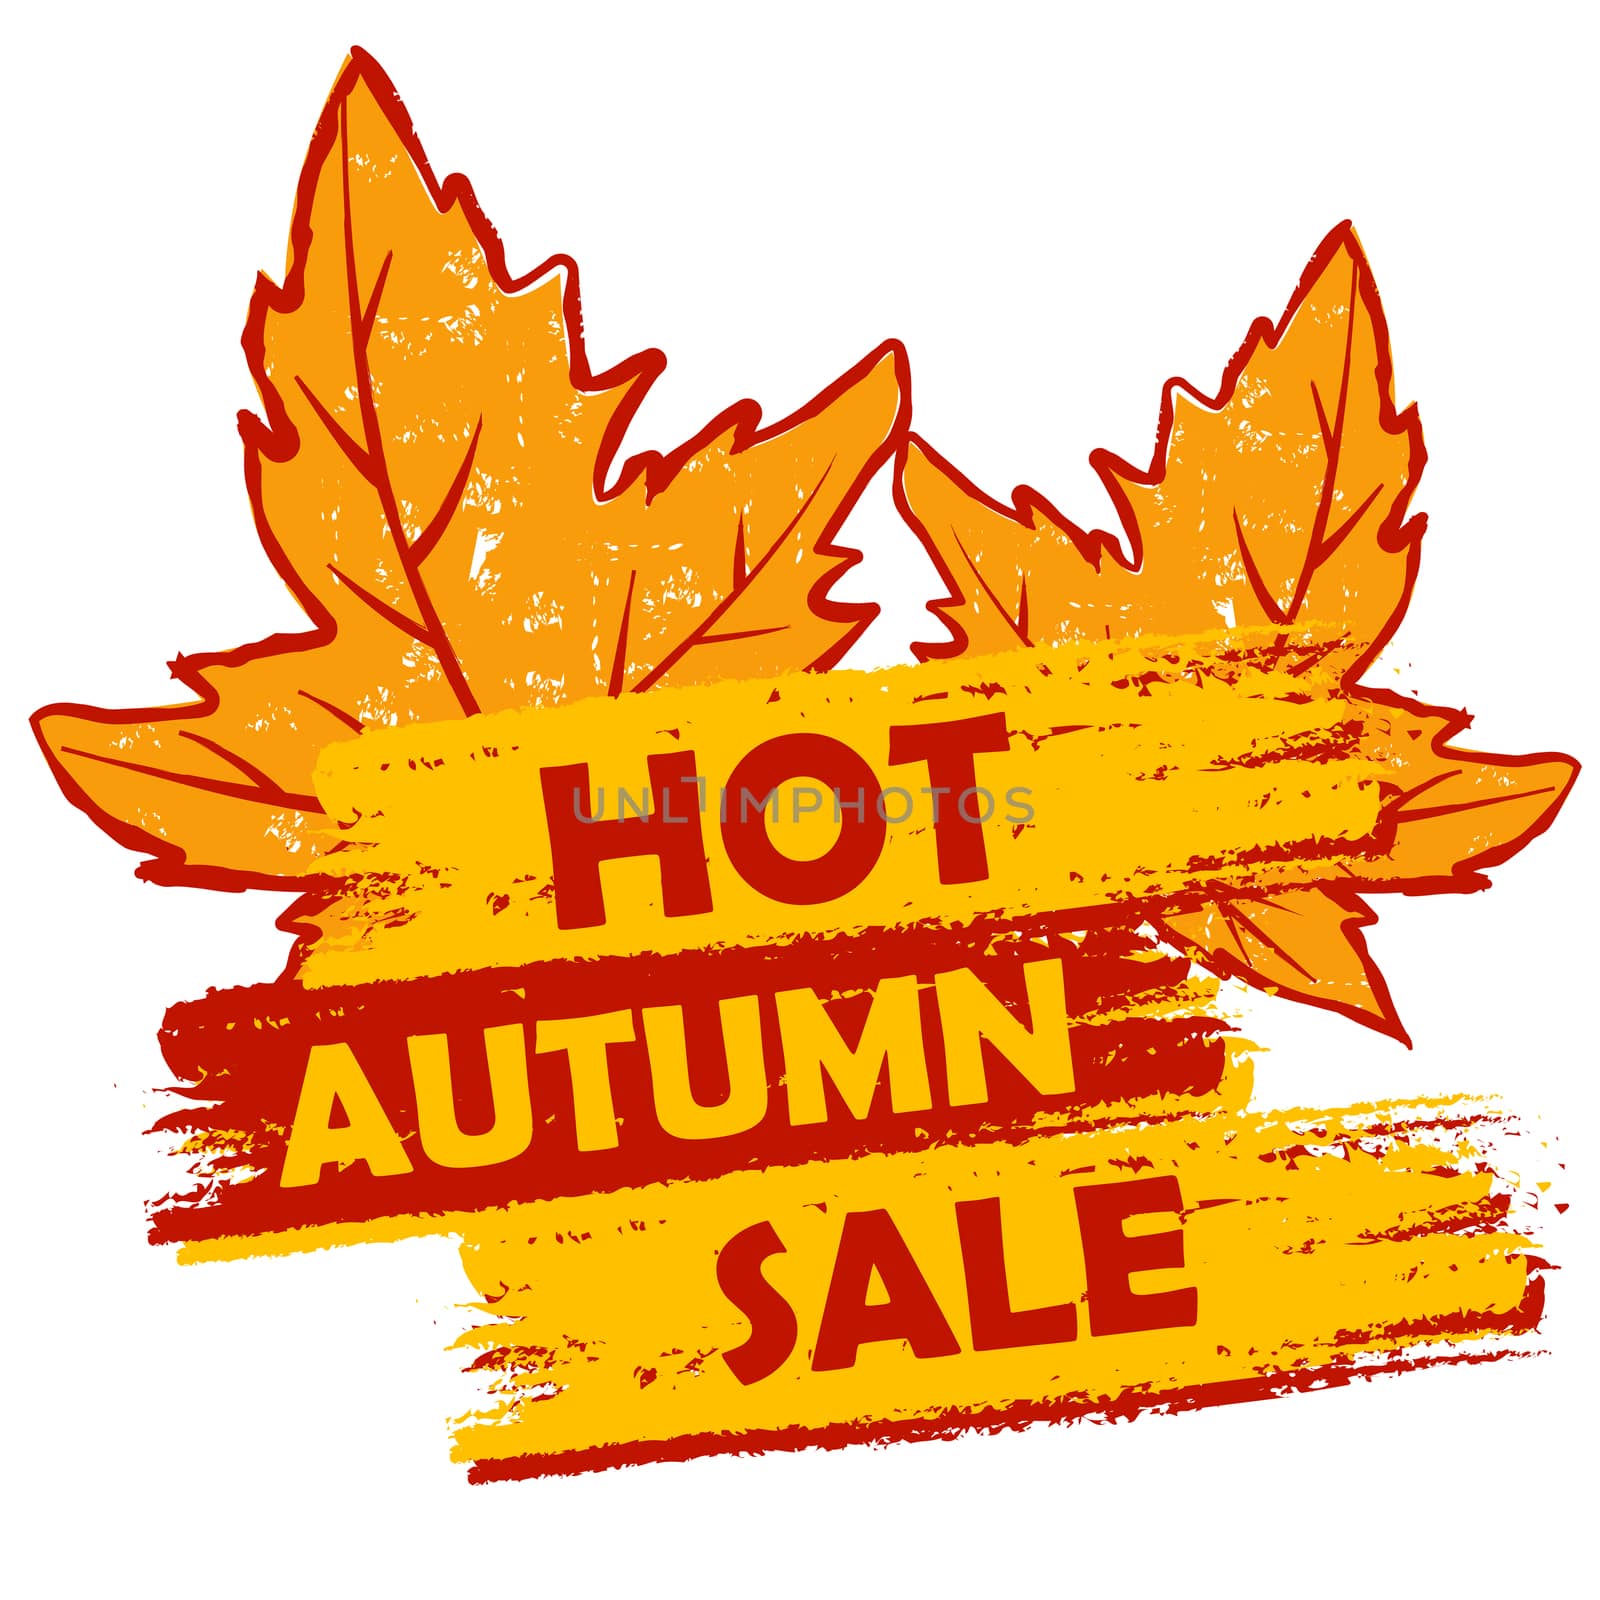 hot autumn sale with leaves, orange and brown drawn label by marinini